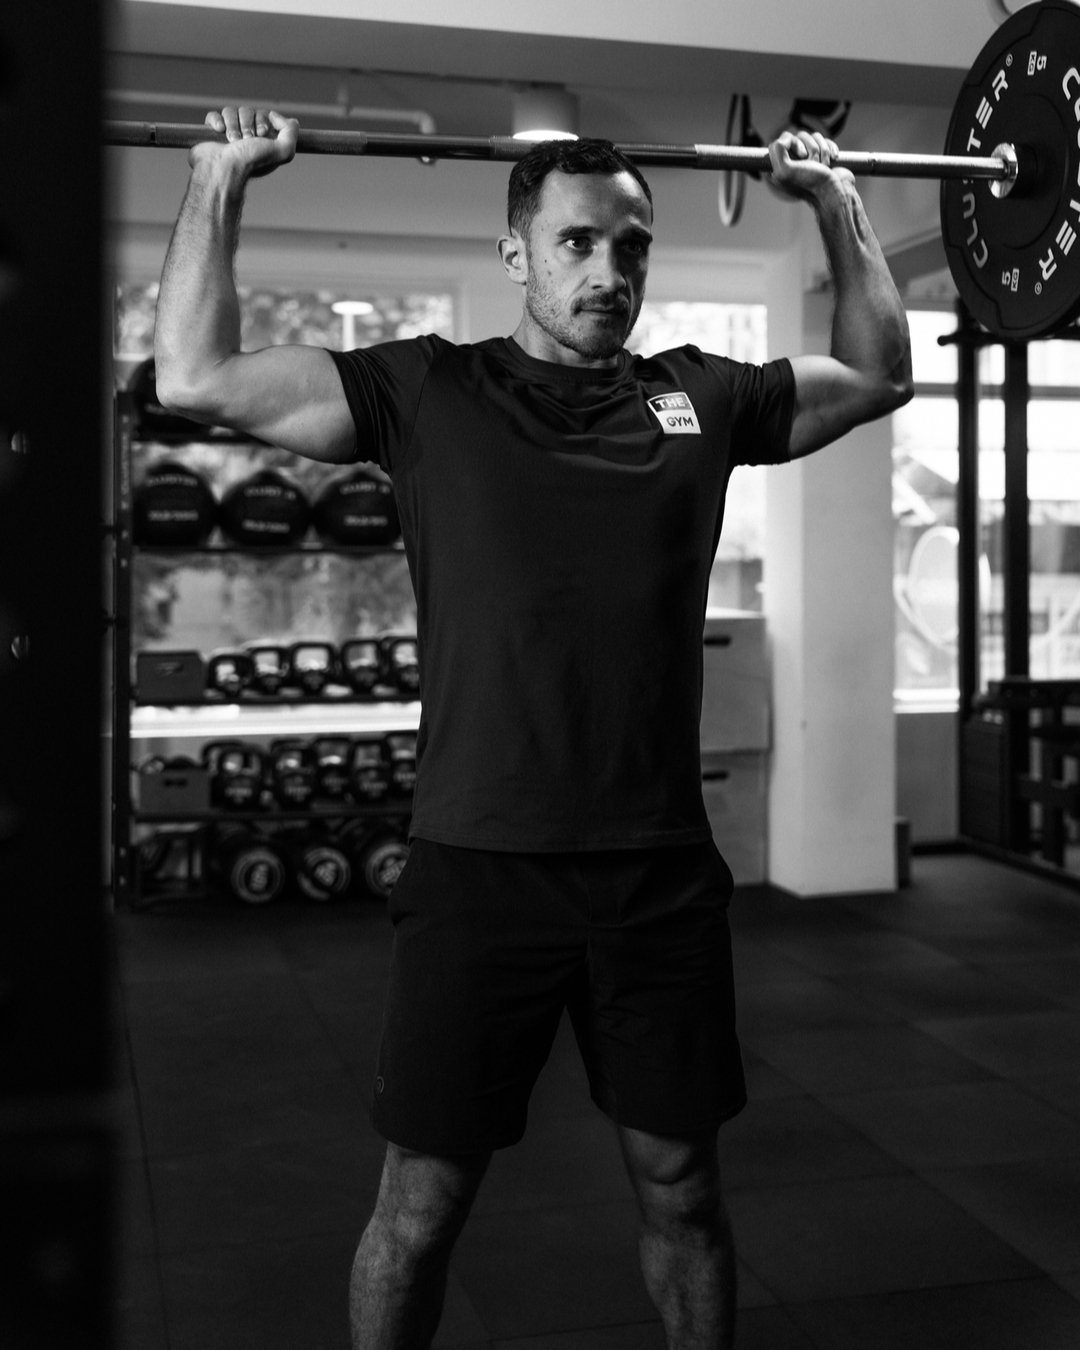 Coach Ben (@bennyrimene), co-owner of The Gym, began his career as a professional athlete for the Hong Kong Rugby Sevens team. He focuses on developing fundamental movement patterns to help clients achieve their fitness goals. With a diverse range of